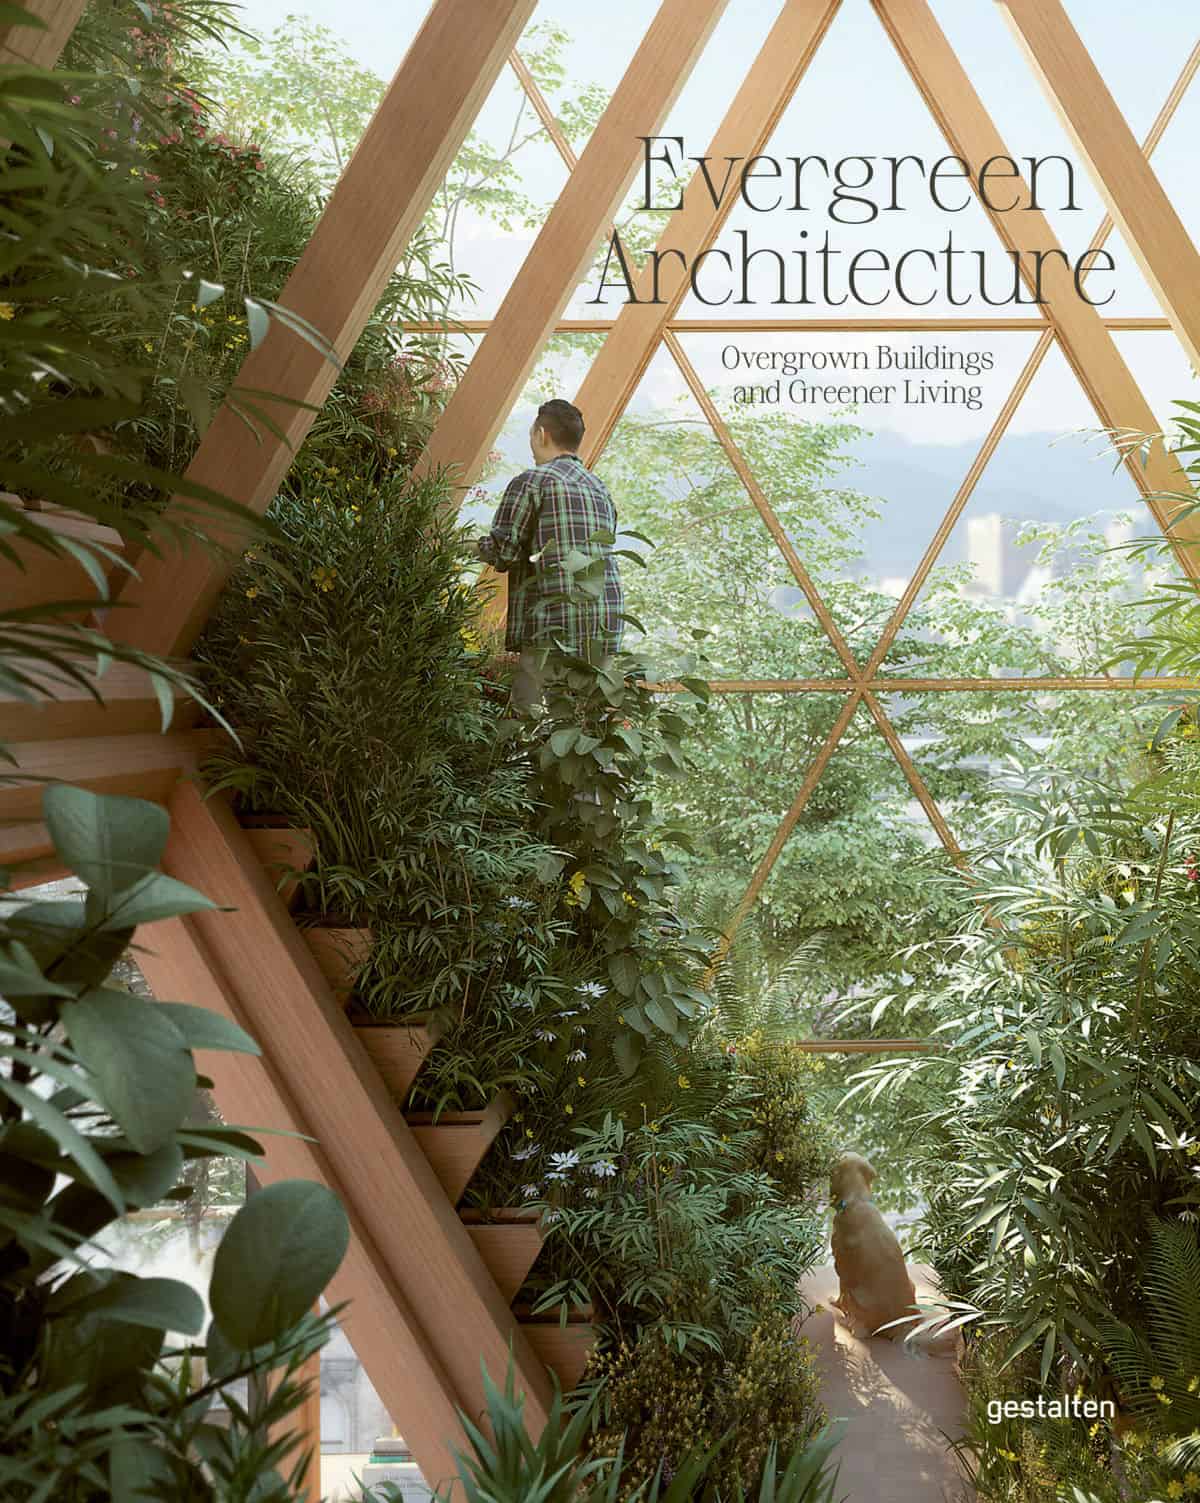 The Book "Evergreen Architecture: Overgrown Buildings and Greener Living" Published by Gestalten